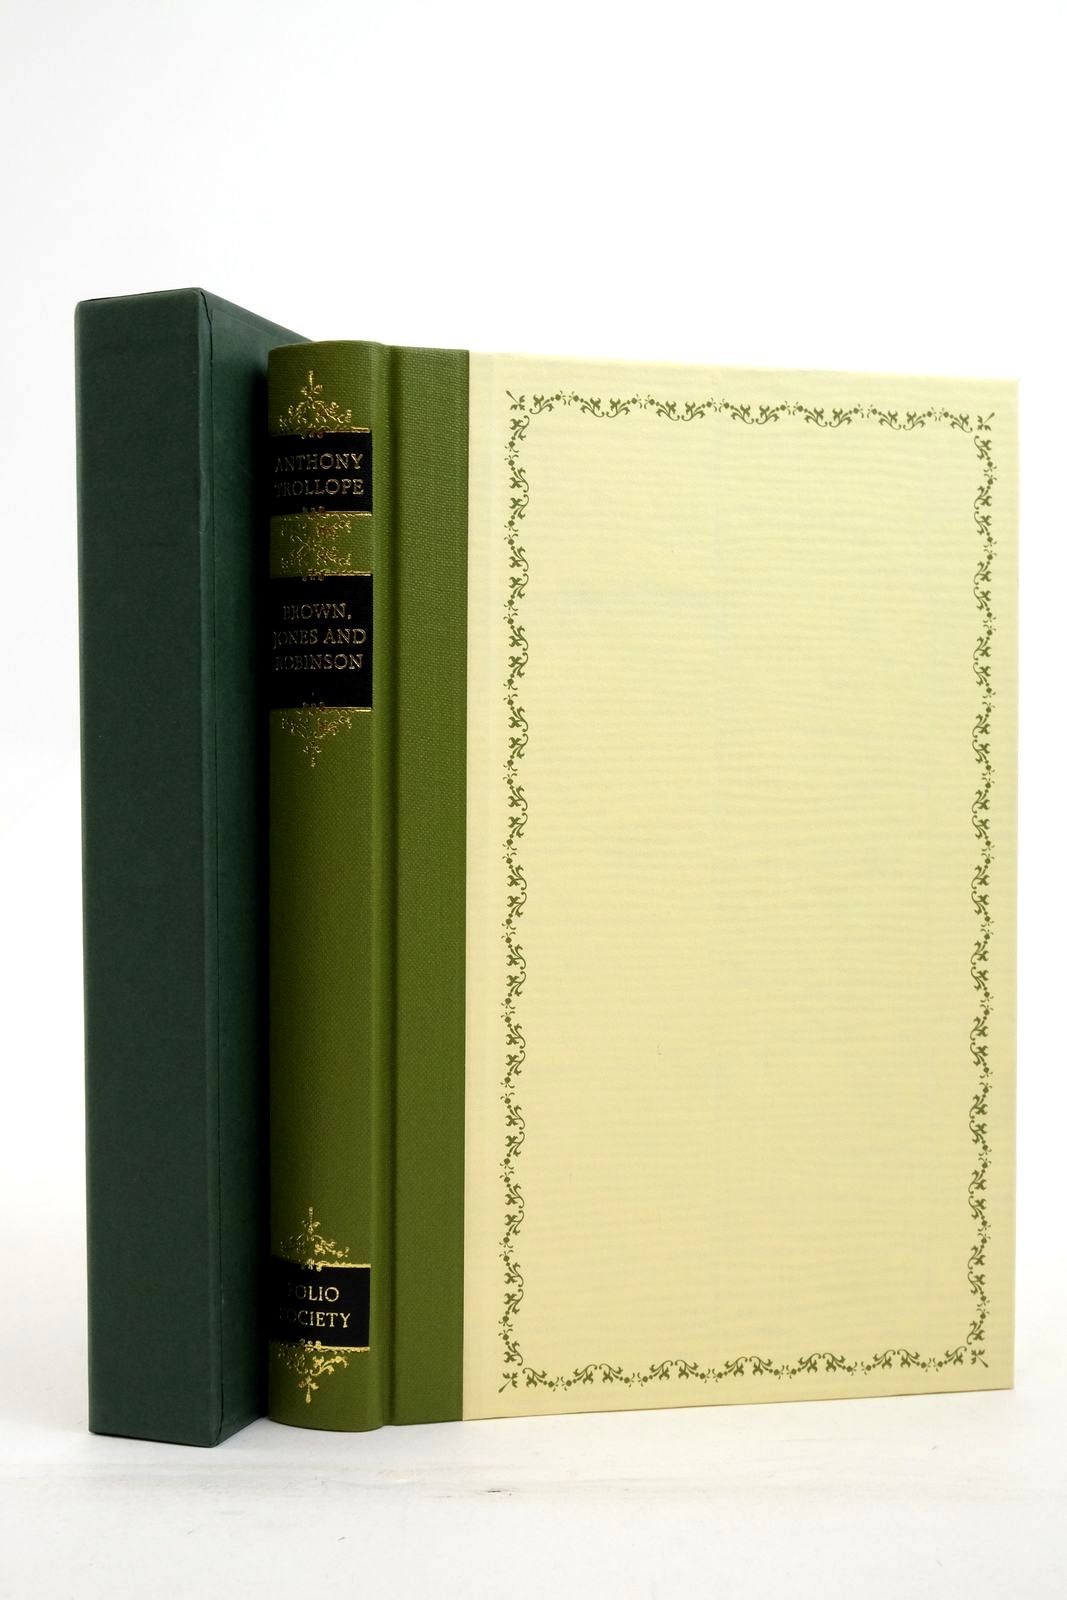 Photo of THE STRUGGLES OF BROWN, JONES AND ROBINSON written by Trollope, Anthony illustrated by Thomas, Llewellyn published by Folio Society (STOCK CODE: 2138197)  for sale by Stella & Rose's Books